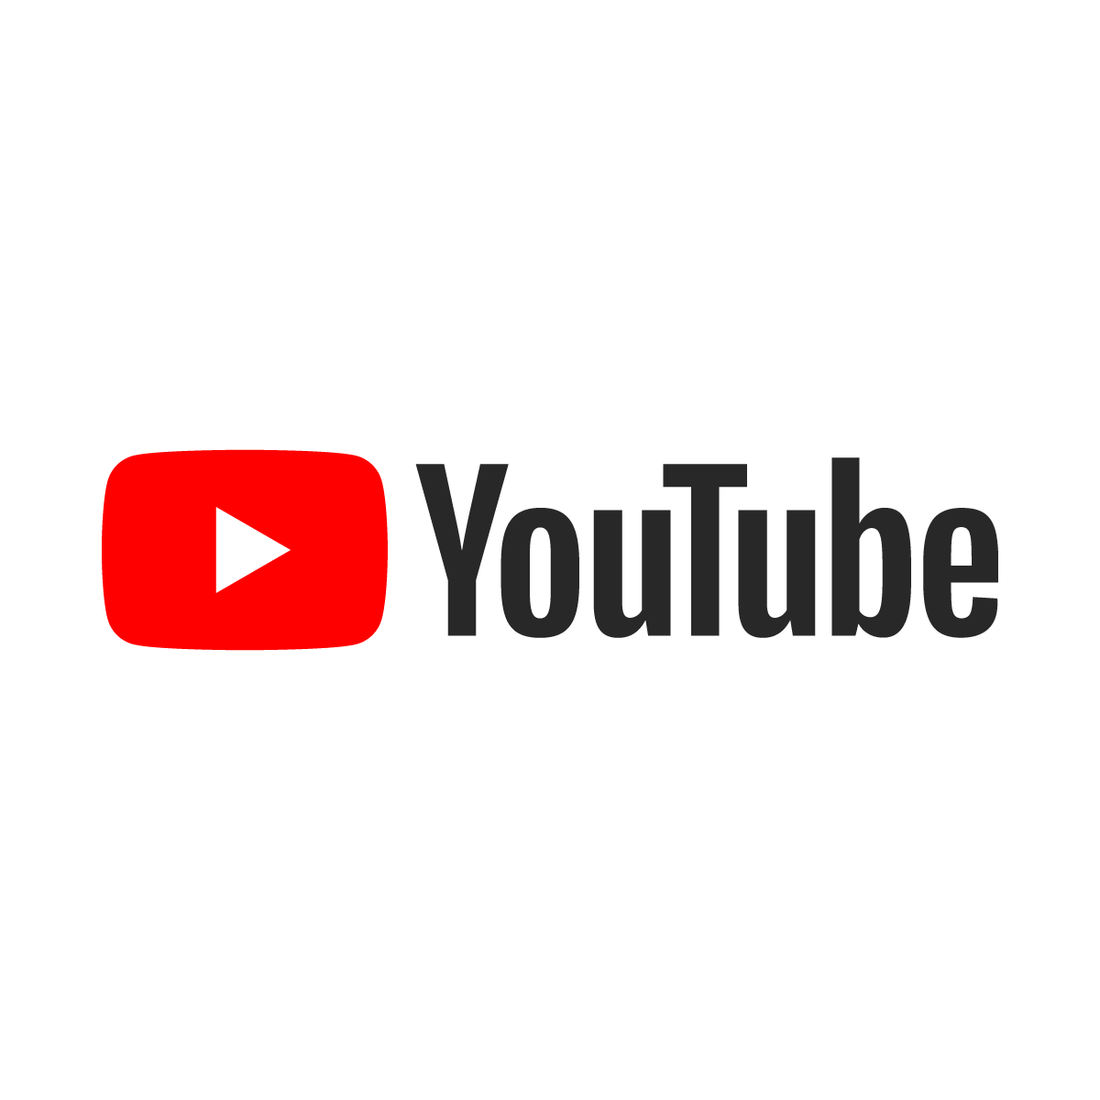 Check out our YouTube channel!